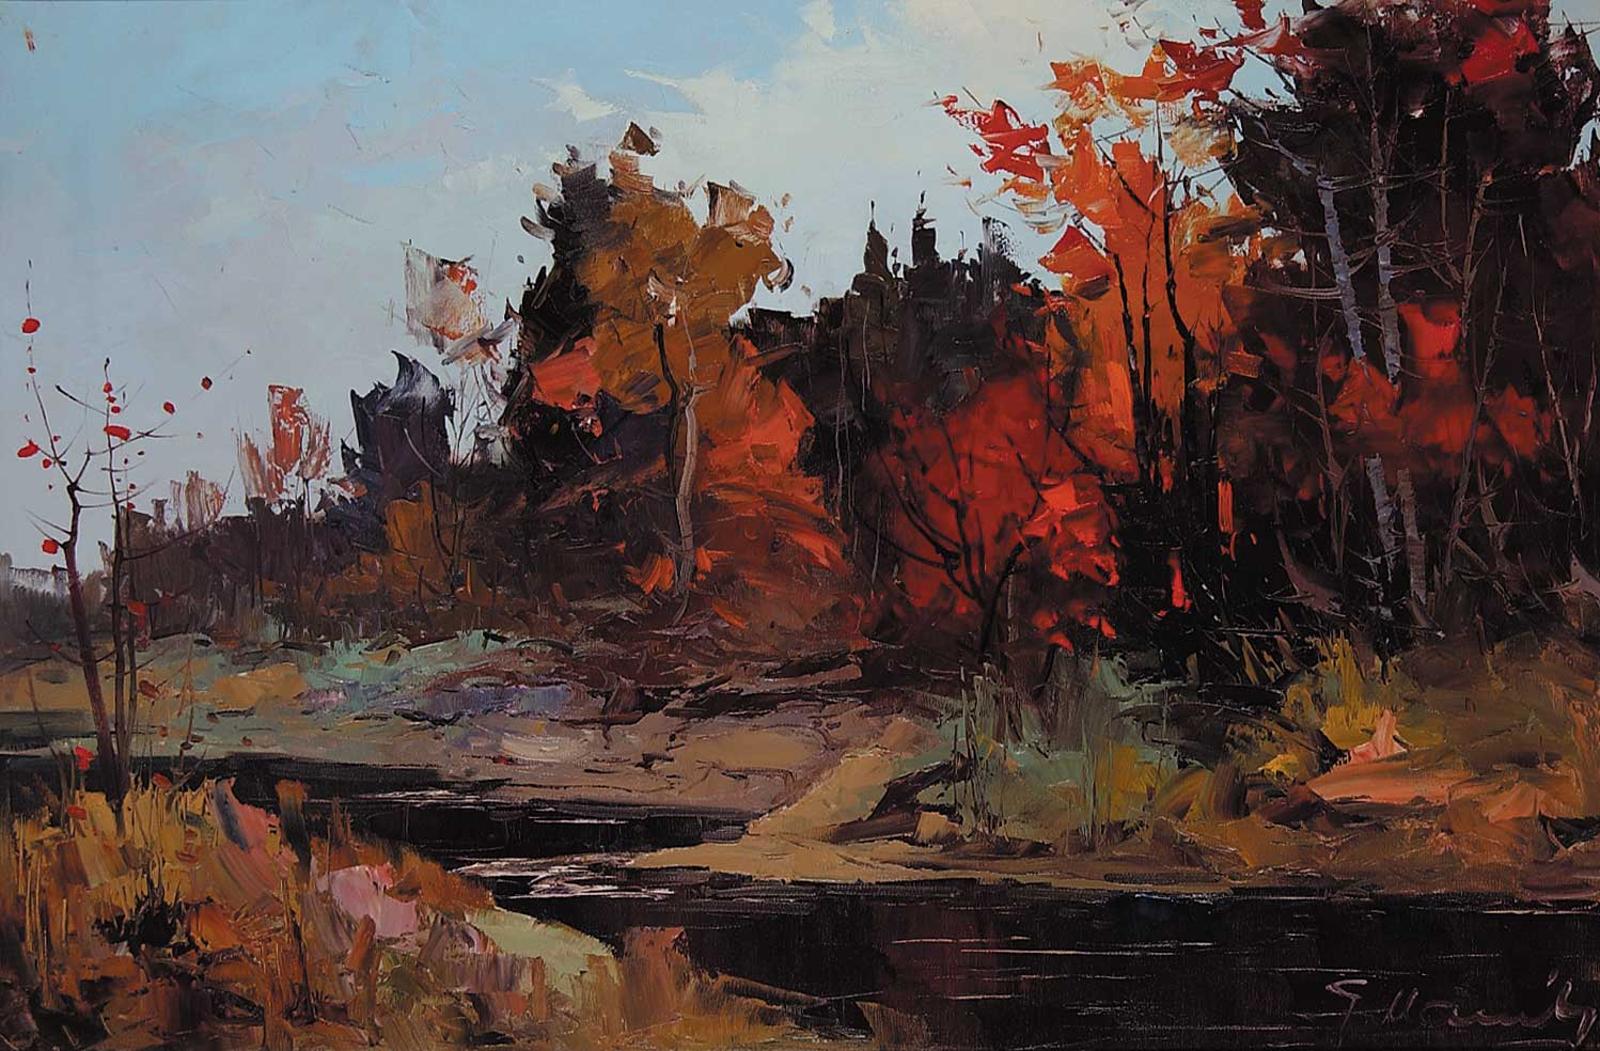 Geza (Gordon) Marich (1913-1985) - Untitled - Creek with Red Maples